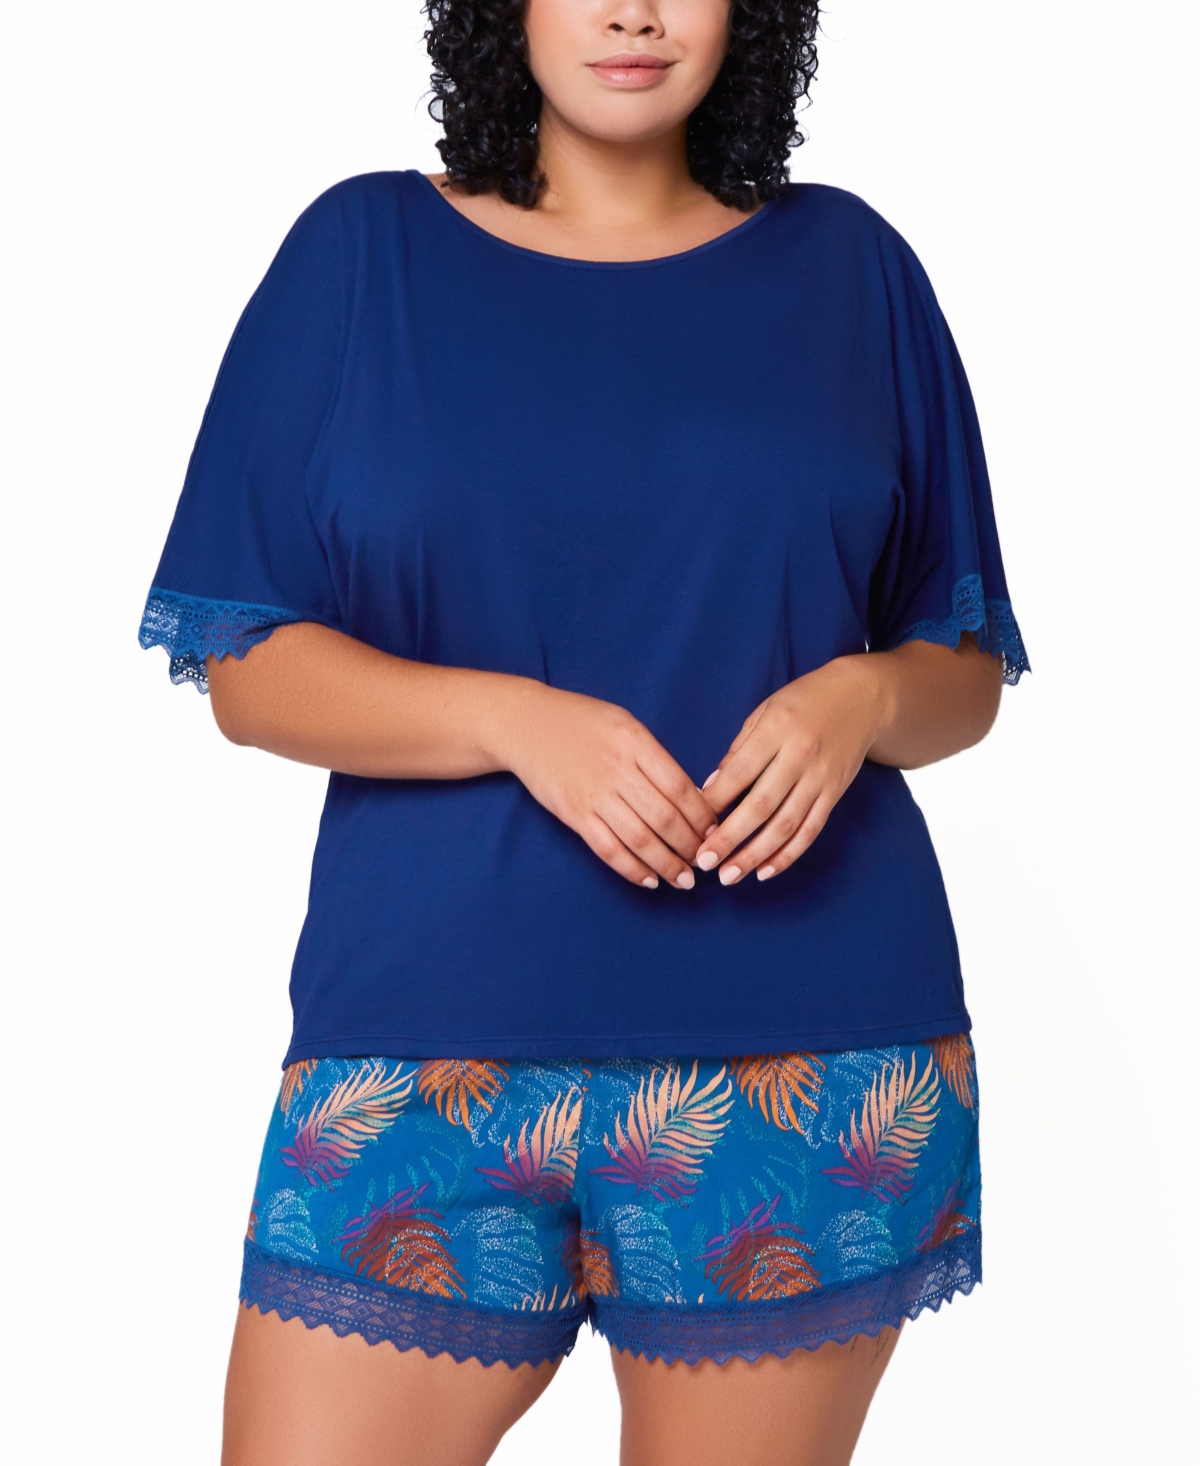 Icollection Plus Size 2pc. Soft Pajama Set Trimmed In Lace In Blue